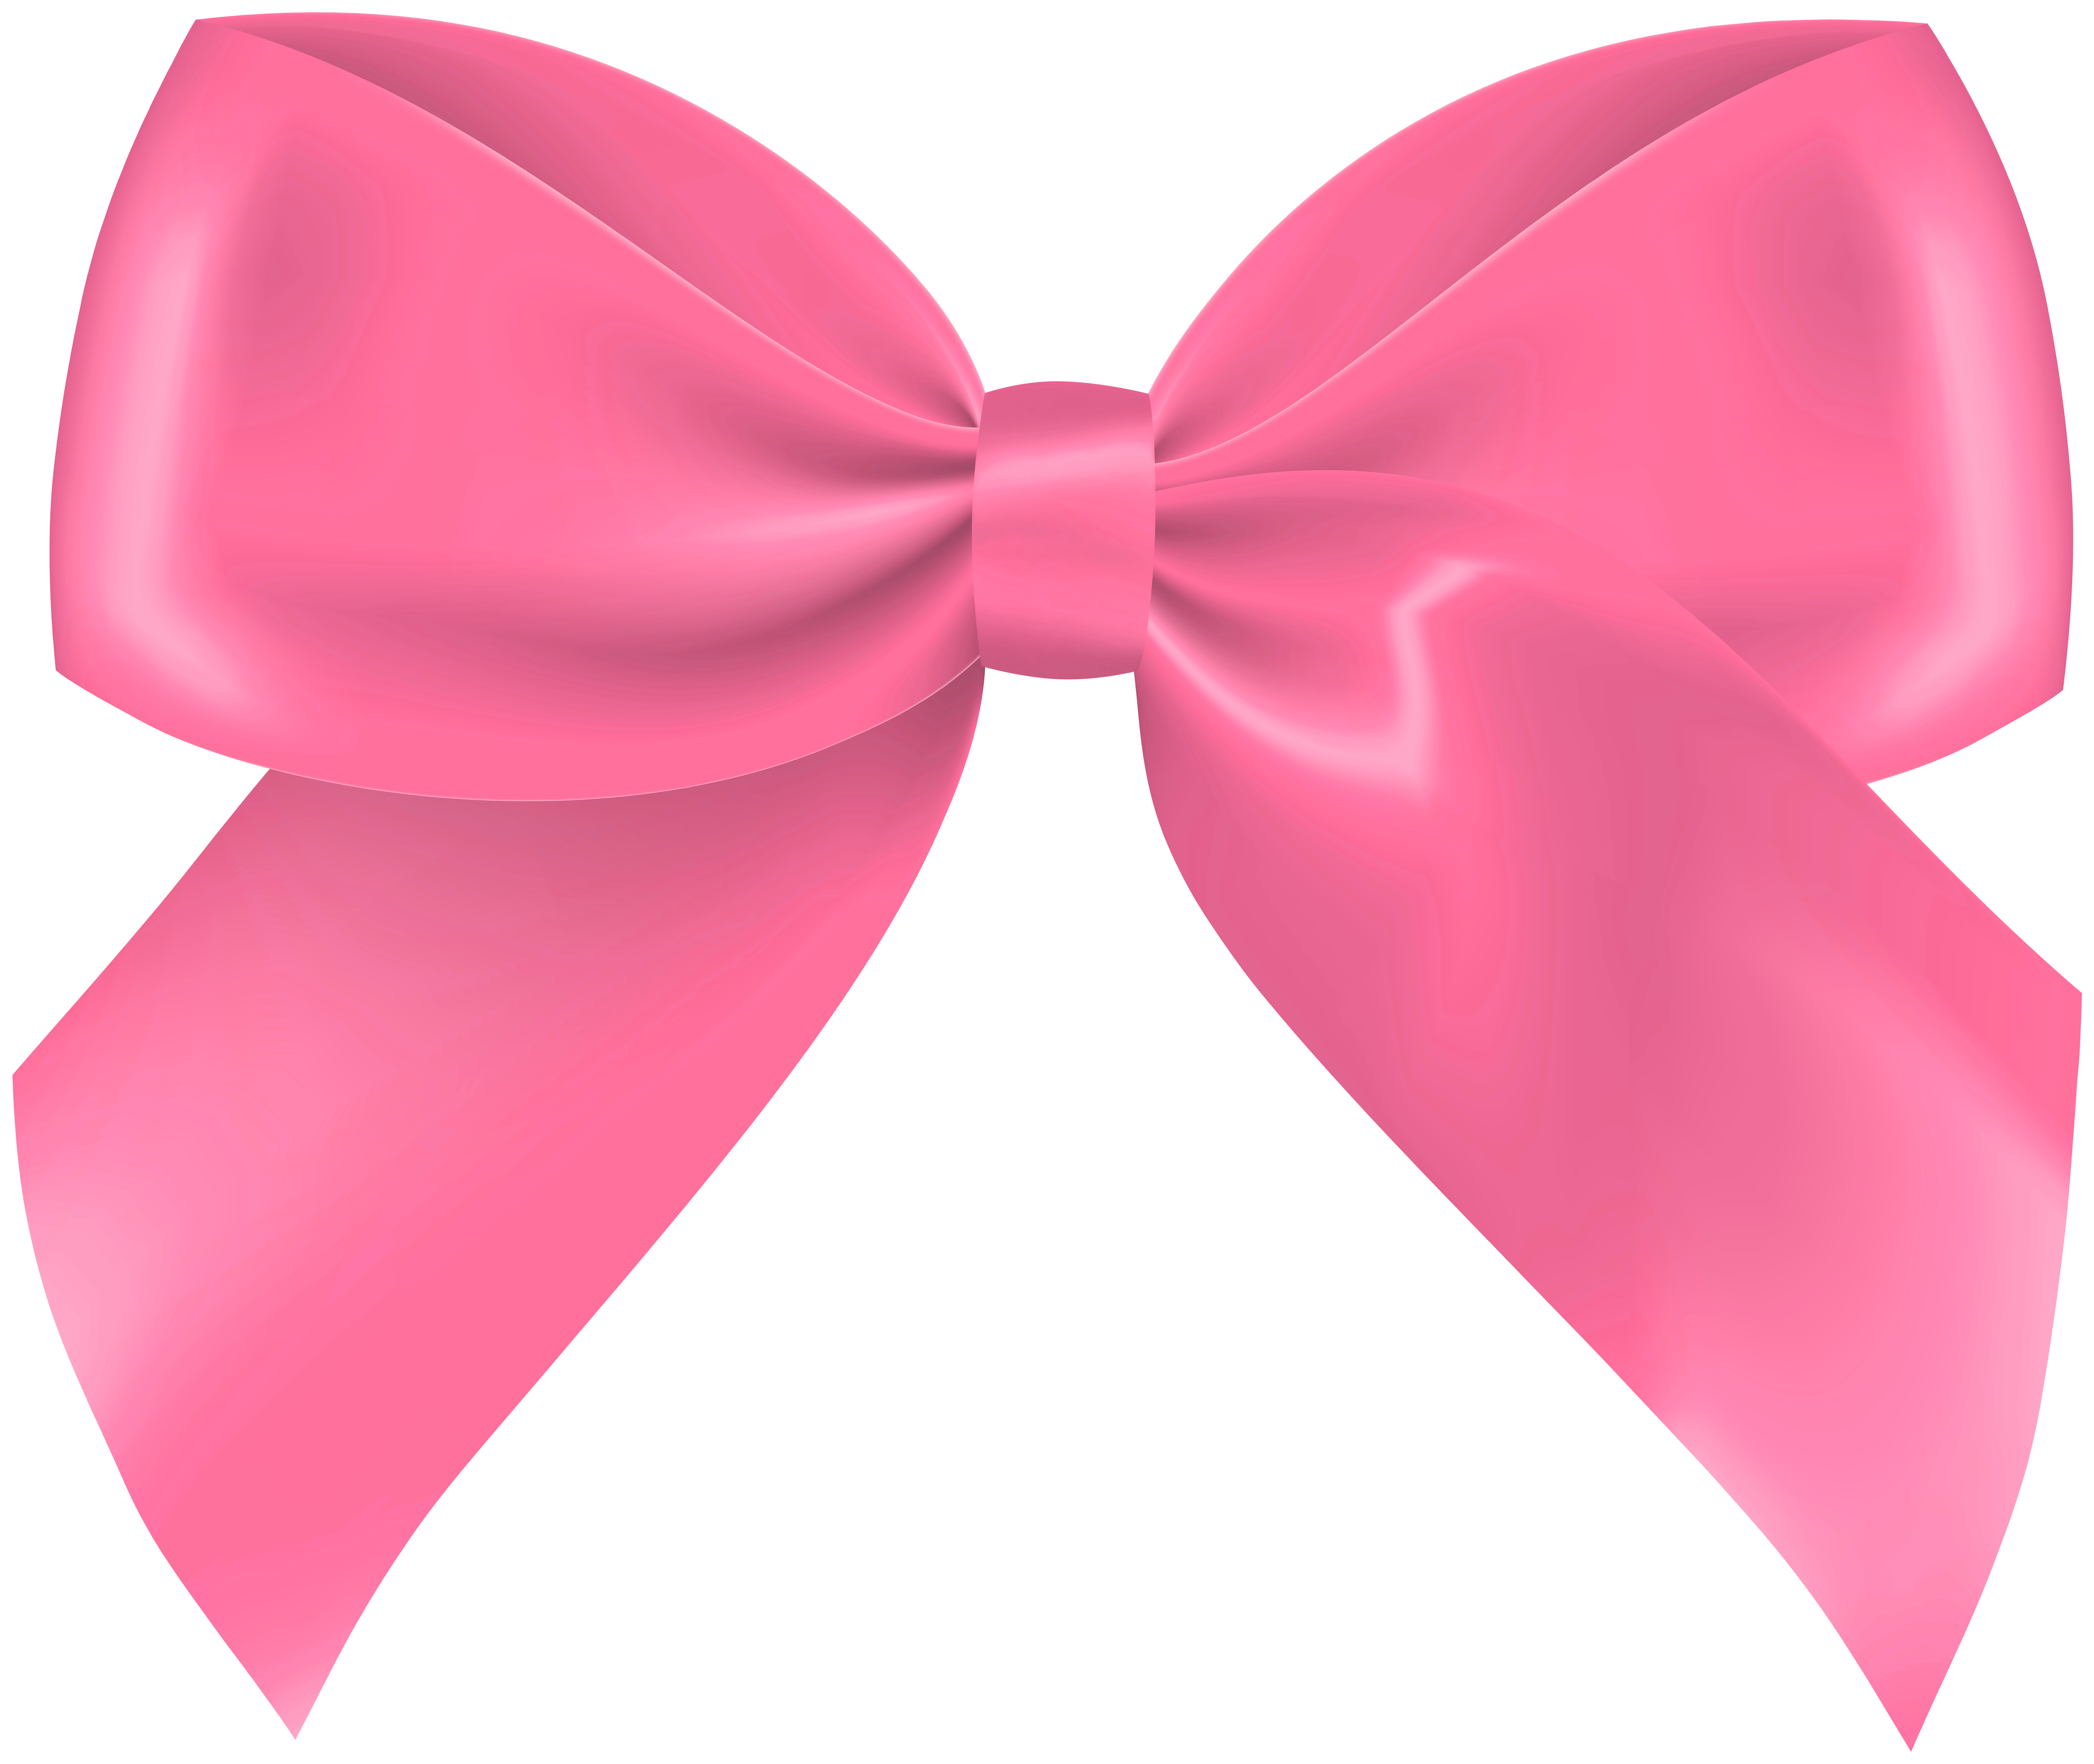 Cute pink bow design element transparent png, free image by rawpixel.com /  Chayanit